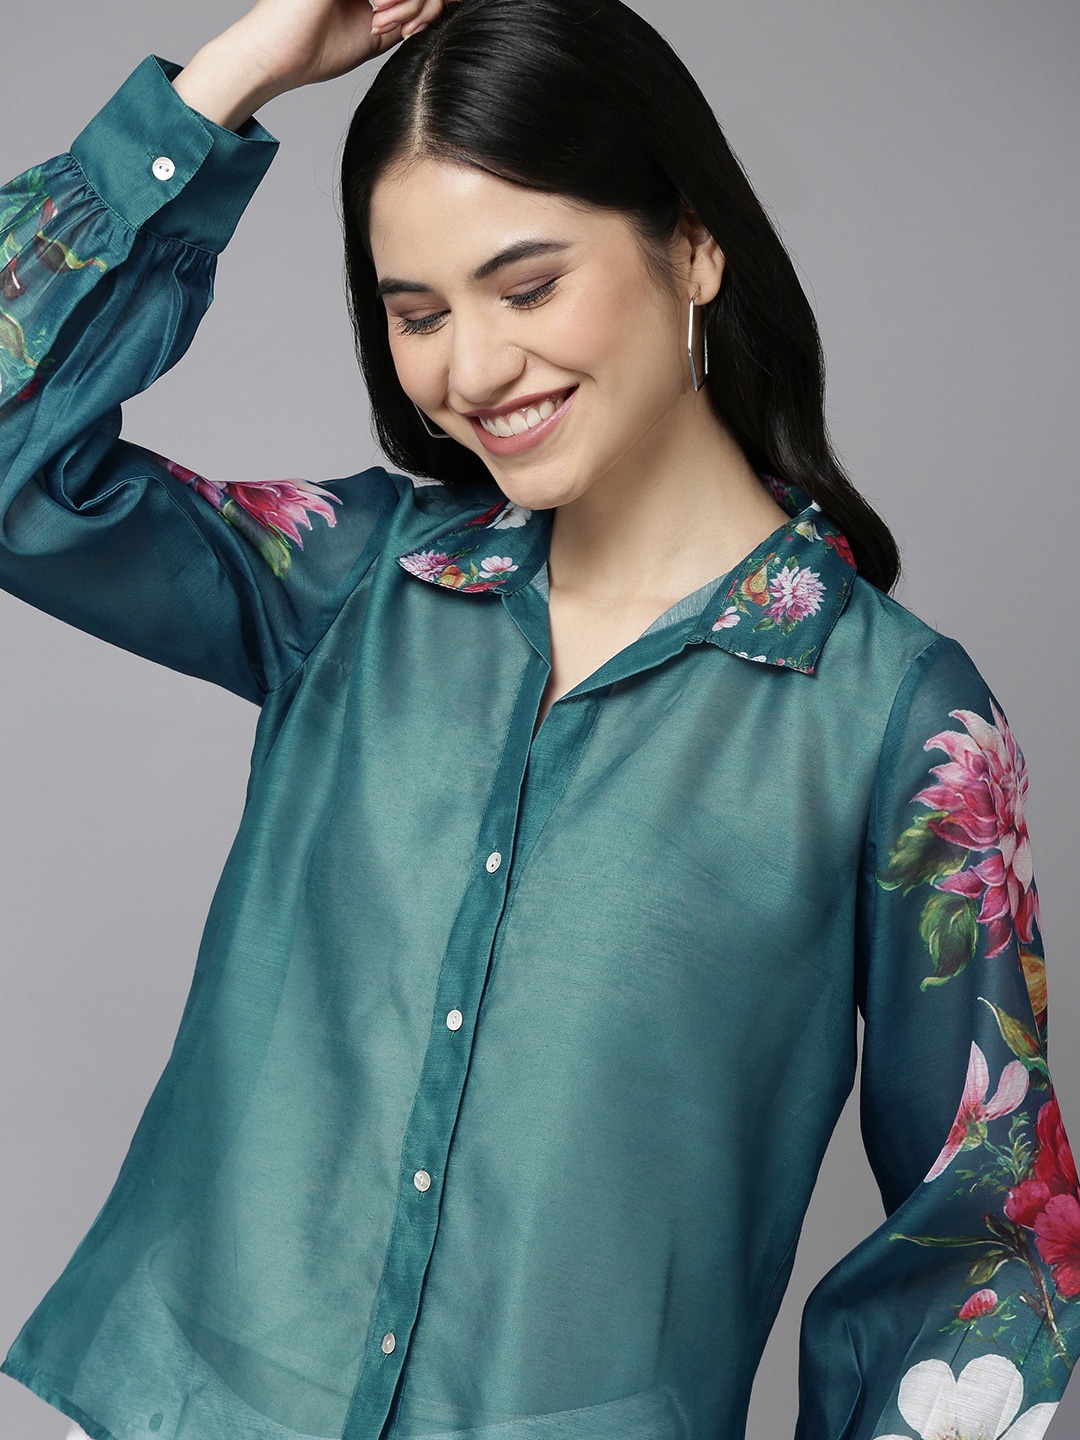 Bhama Couture Women Teal Blue Floral Detail Shirt Style Top Price in India